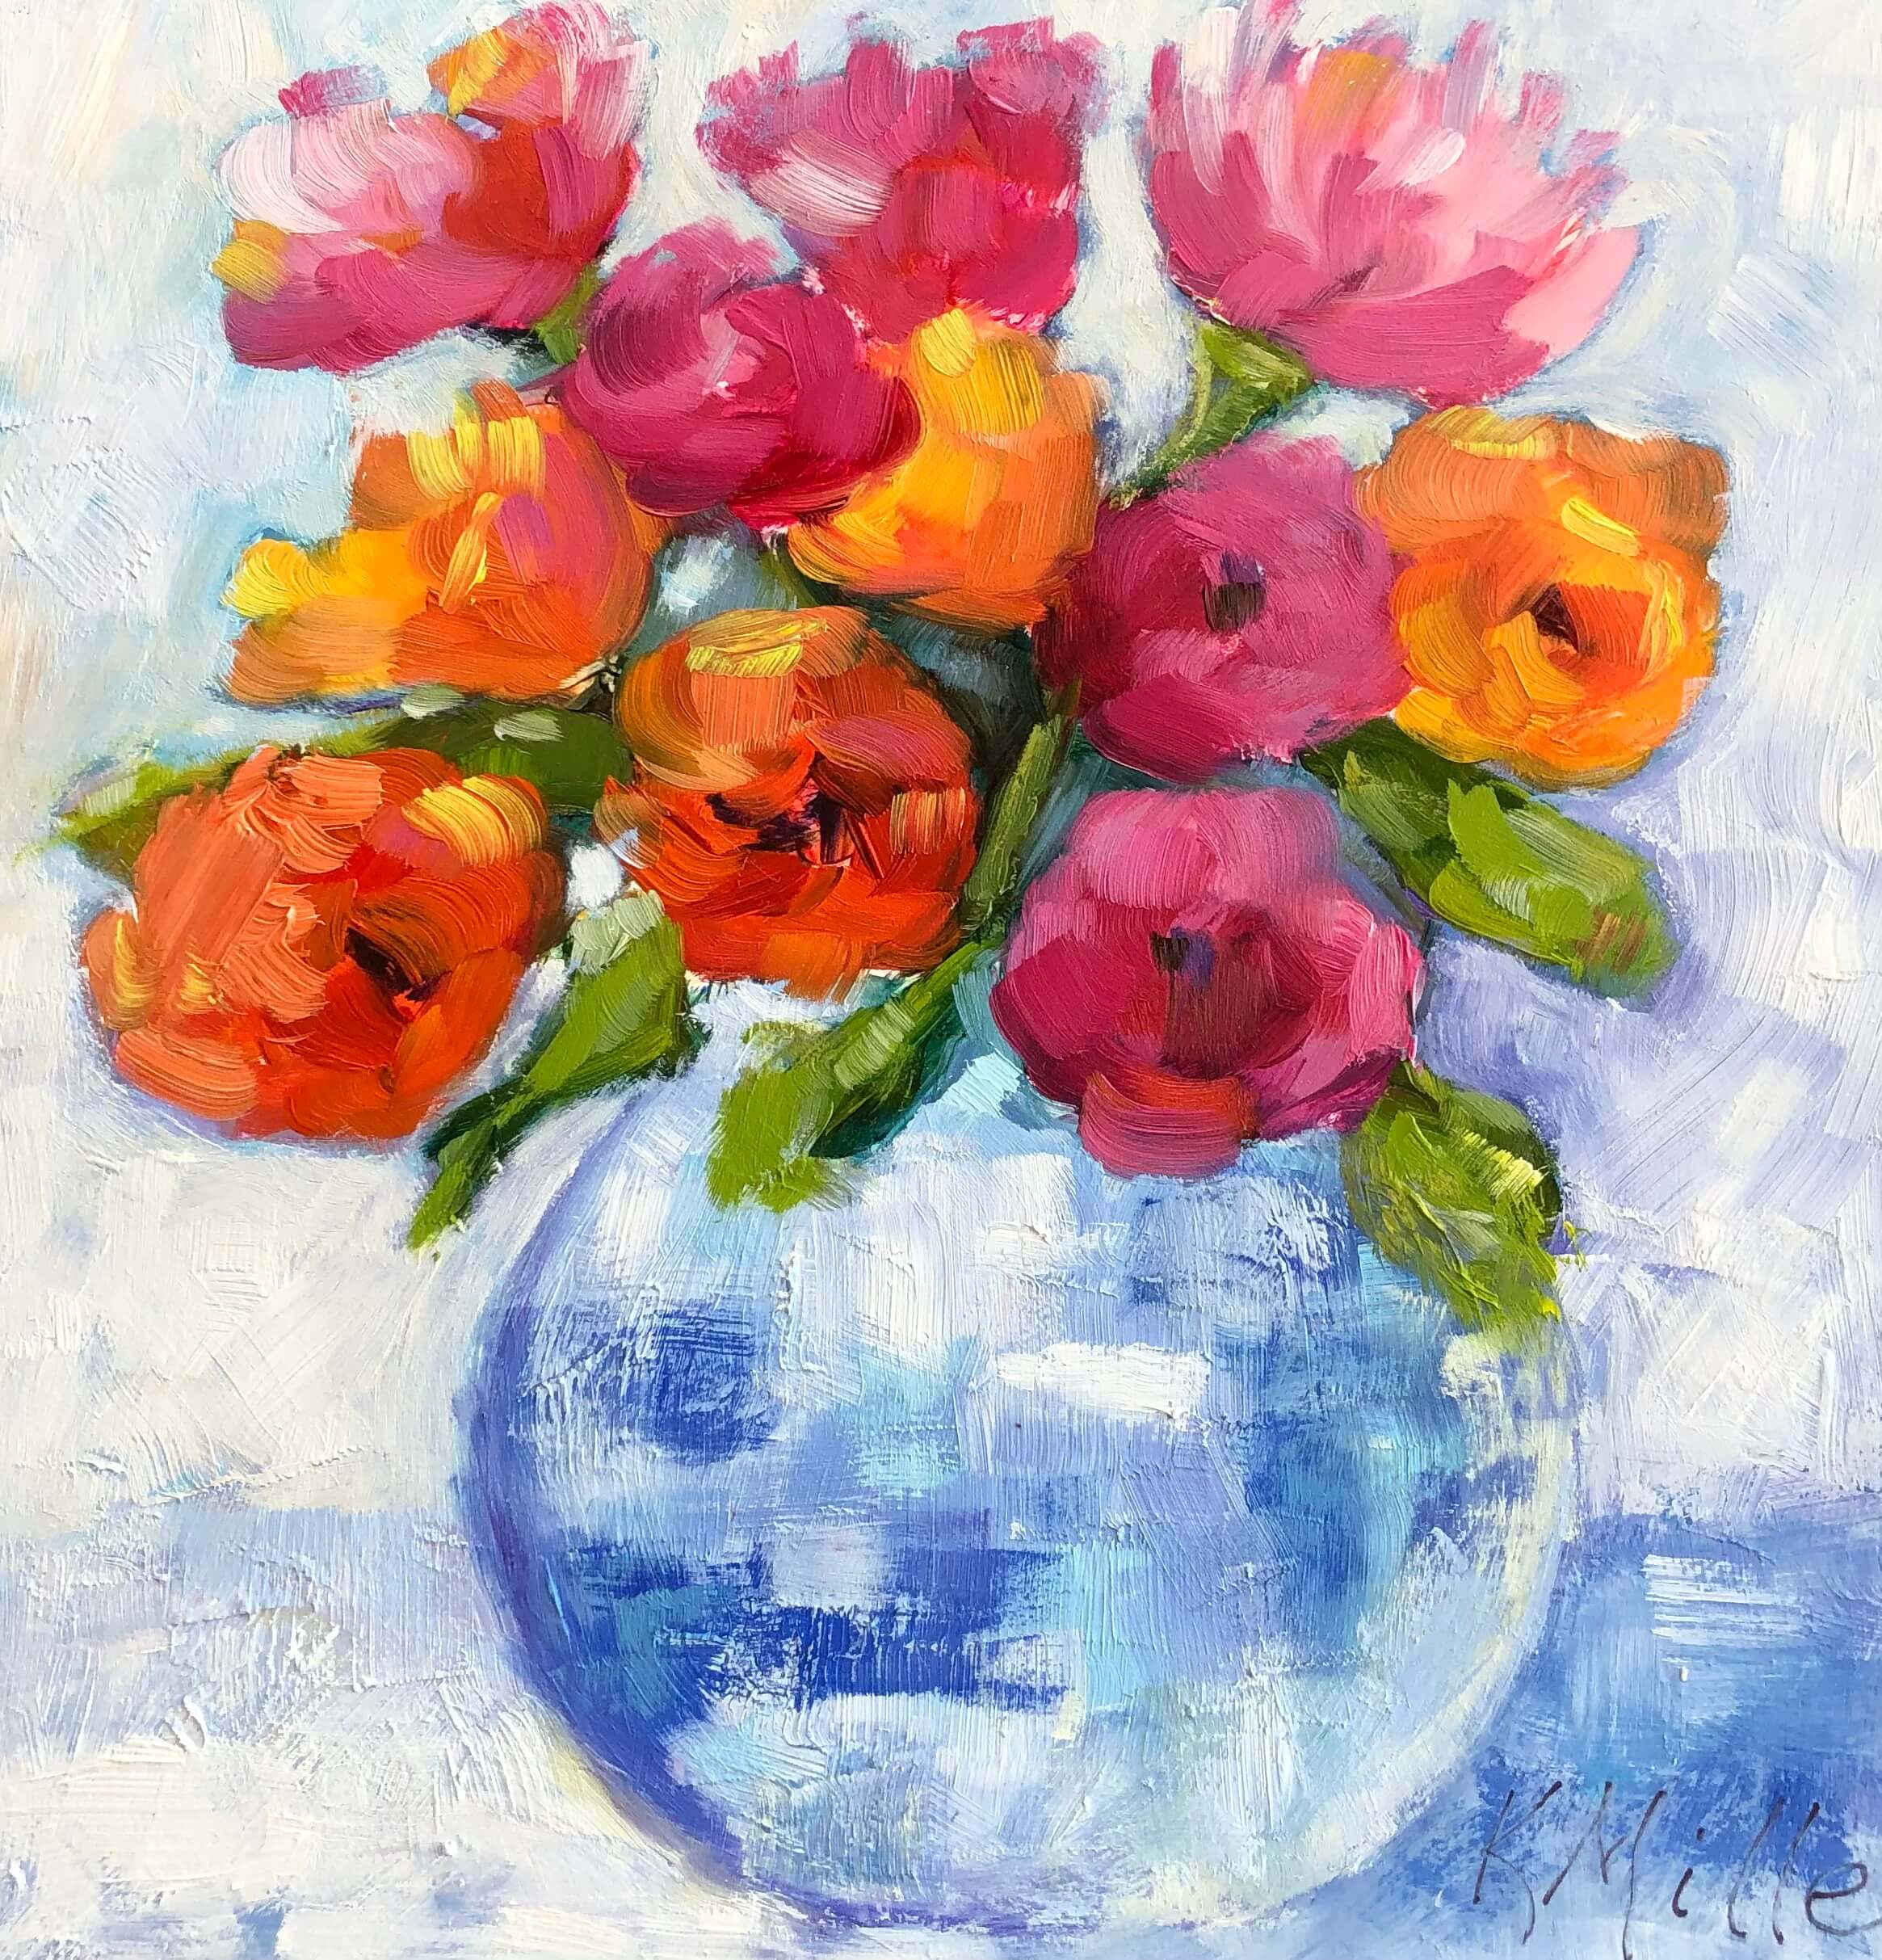 Flowers in Blue and White Vase original oil on museum panel by Kathy Miller